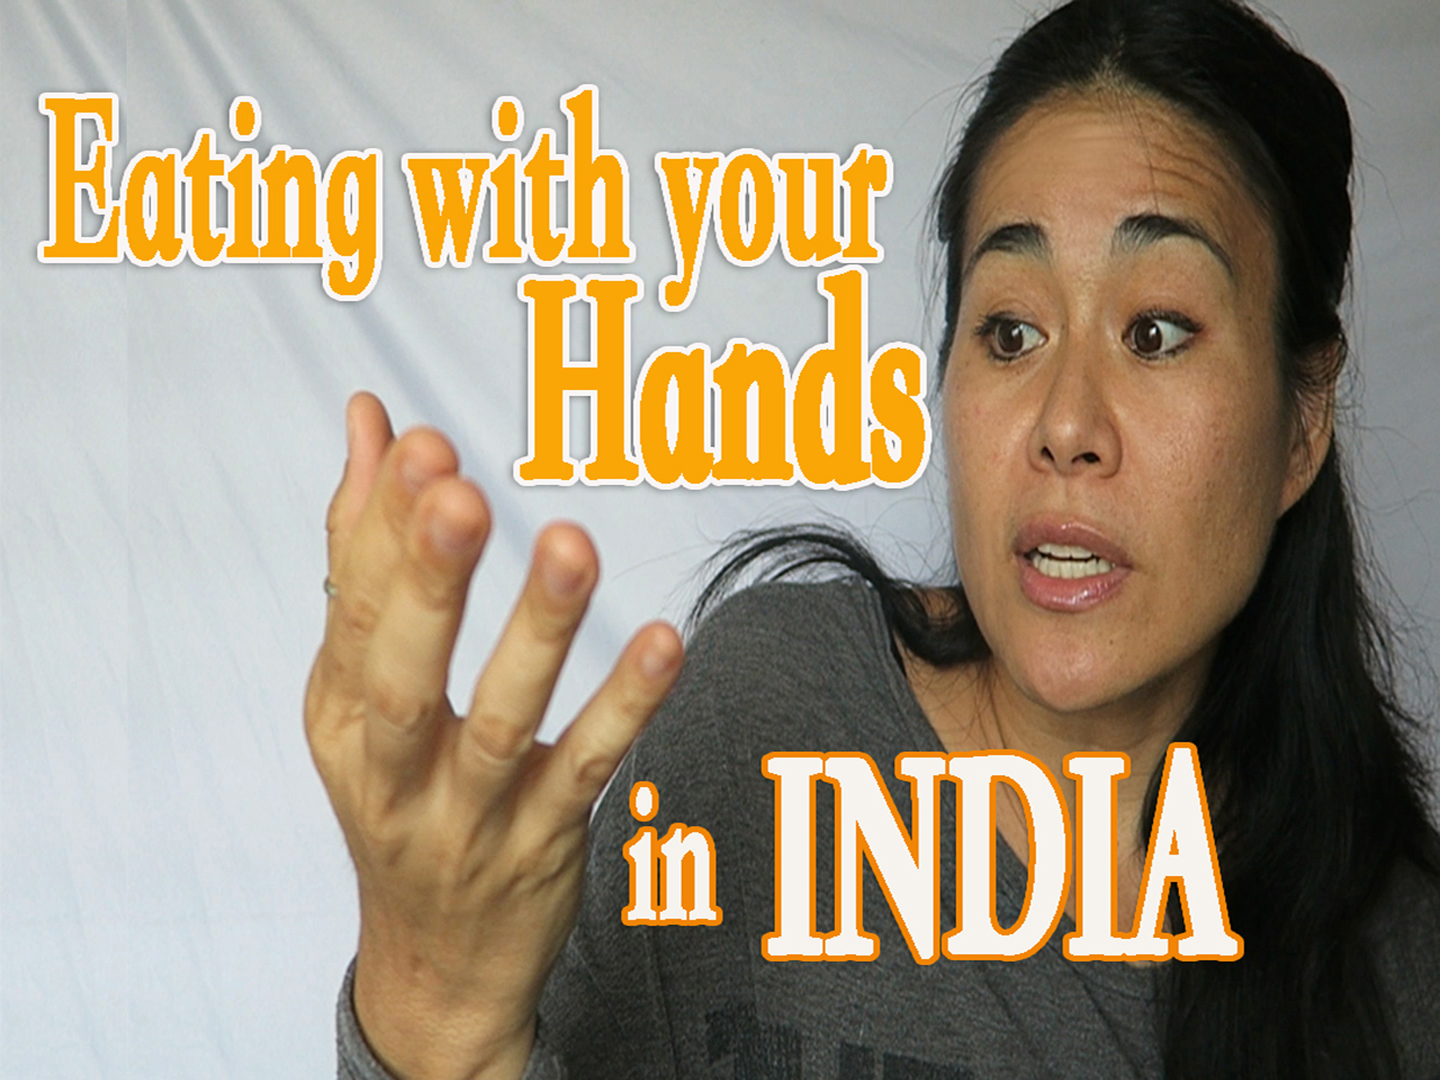 Eating with your hands in India, eating indian food with your hands